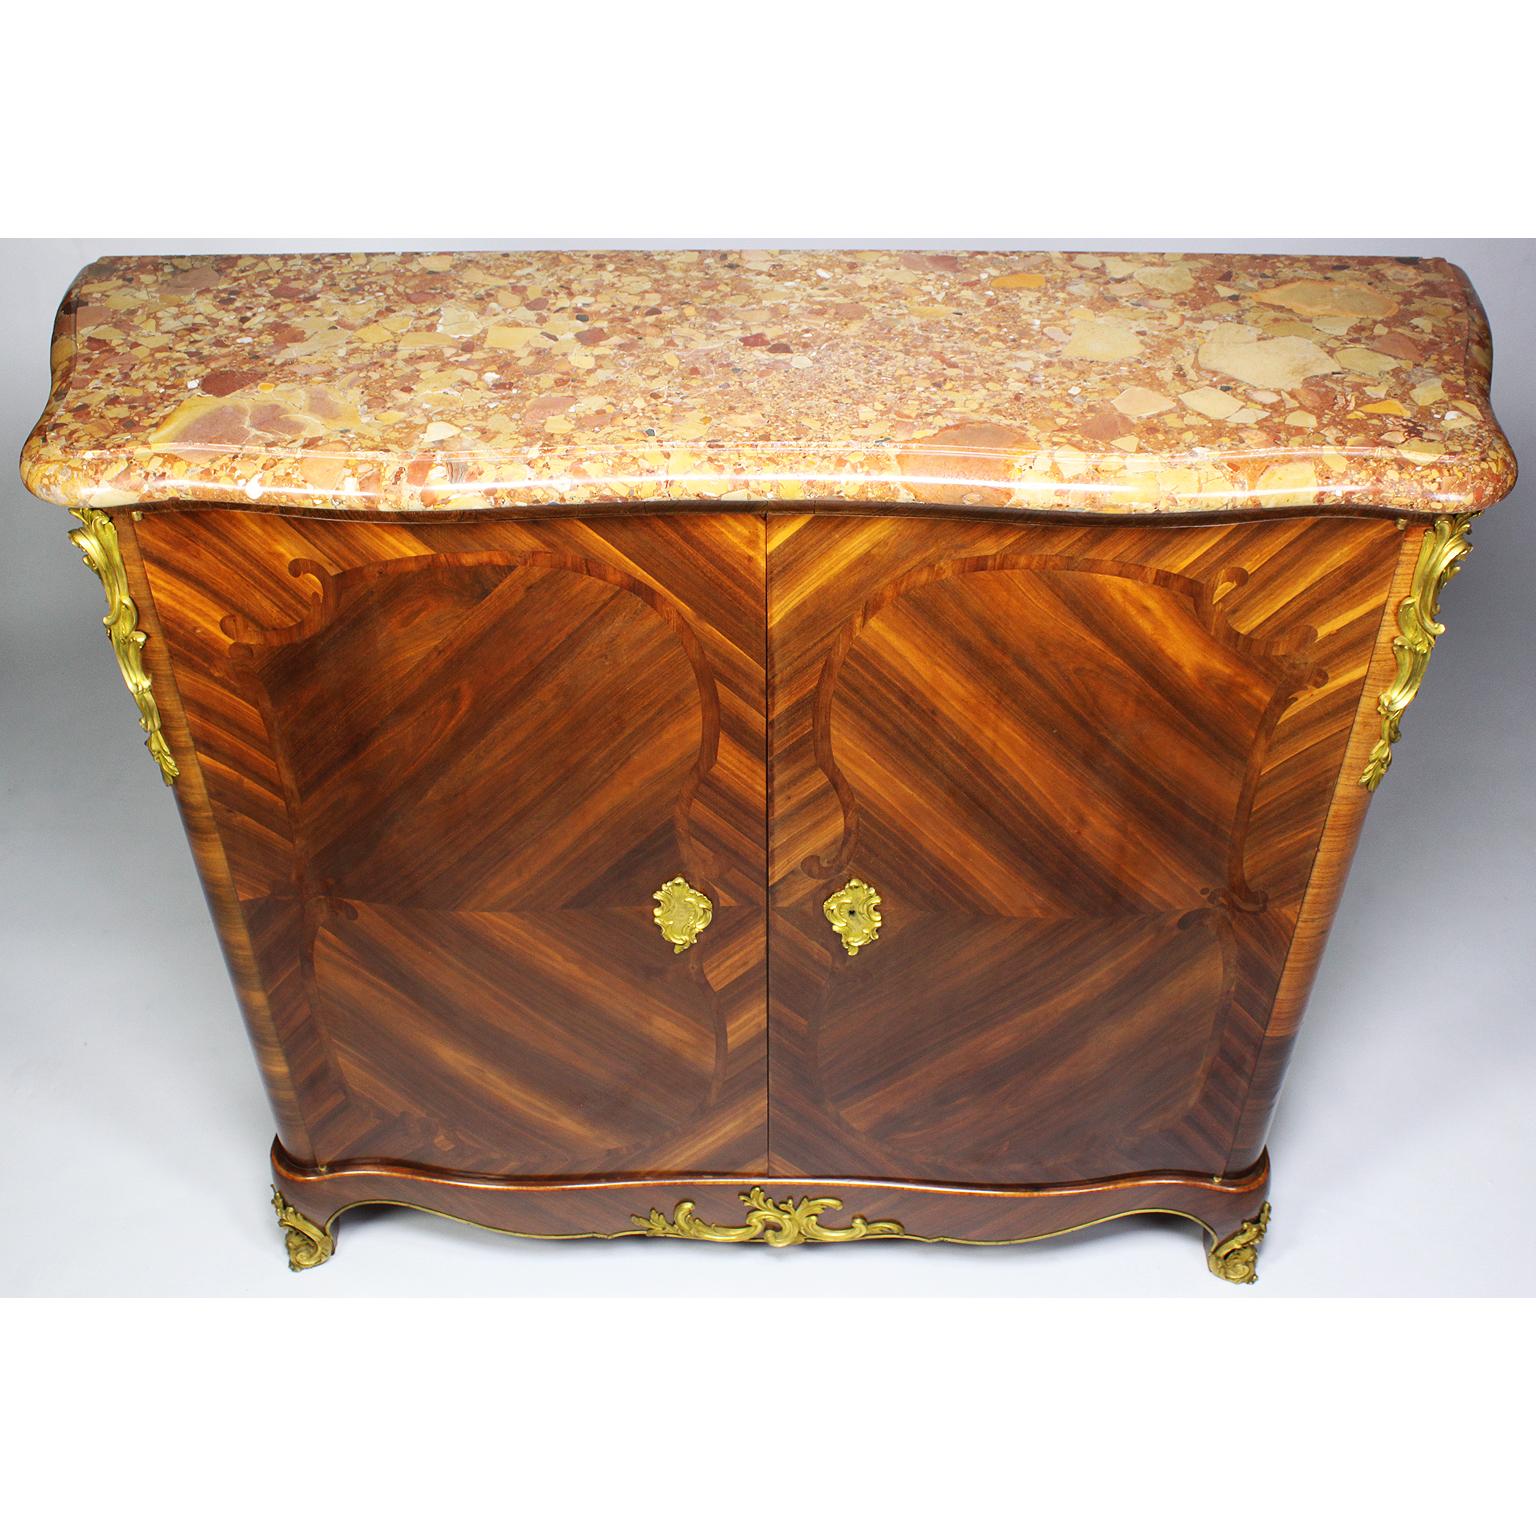 Early 20th Century Pair of French Louis XV Style Tulipwood Slender Side-Cabinets Commodes For Sale